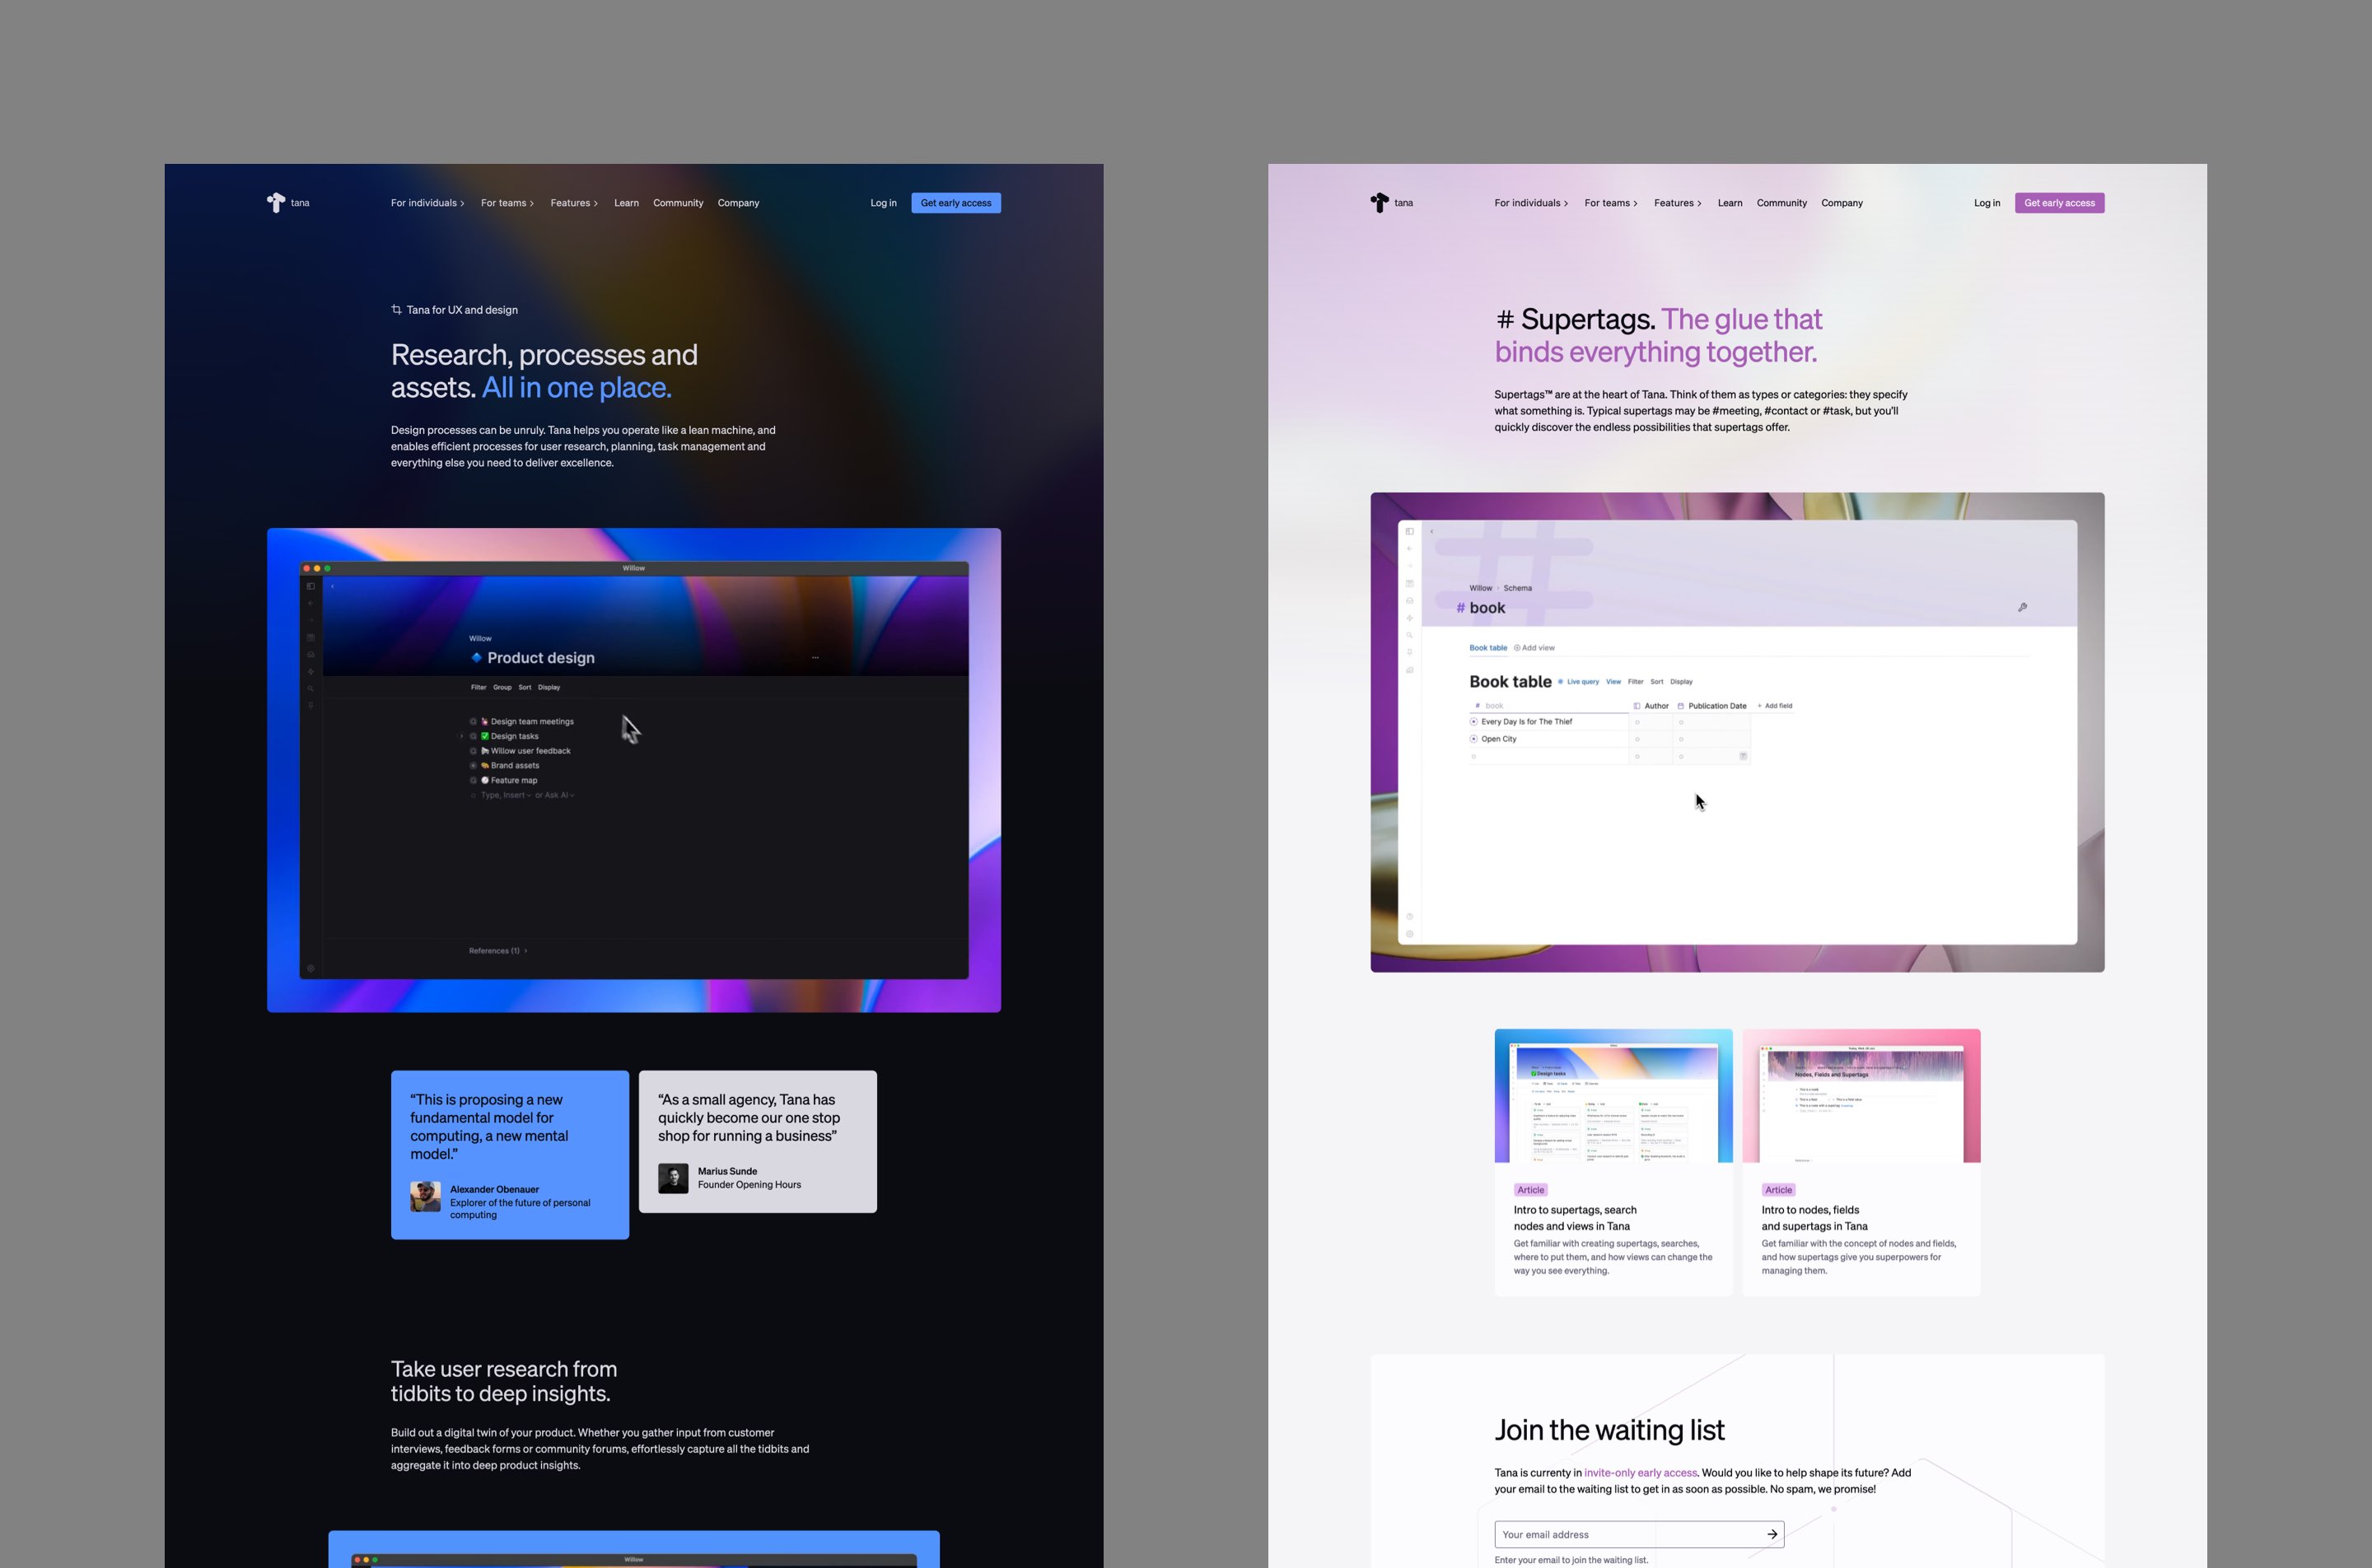 Screenshots of two pages: The Tana for Design page and a page about Tana Supertags